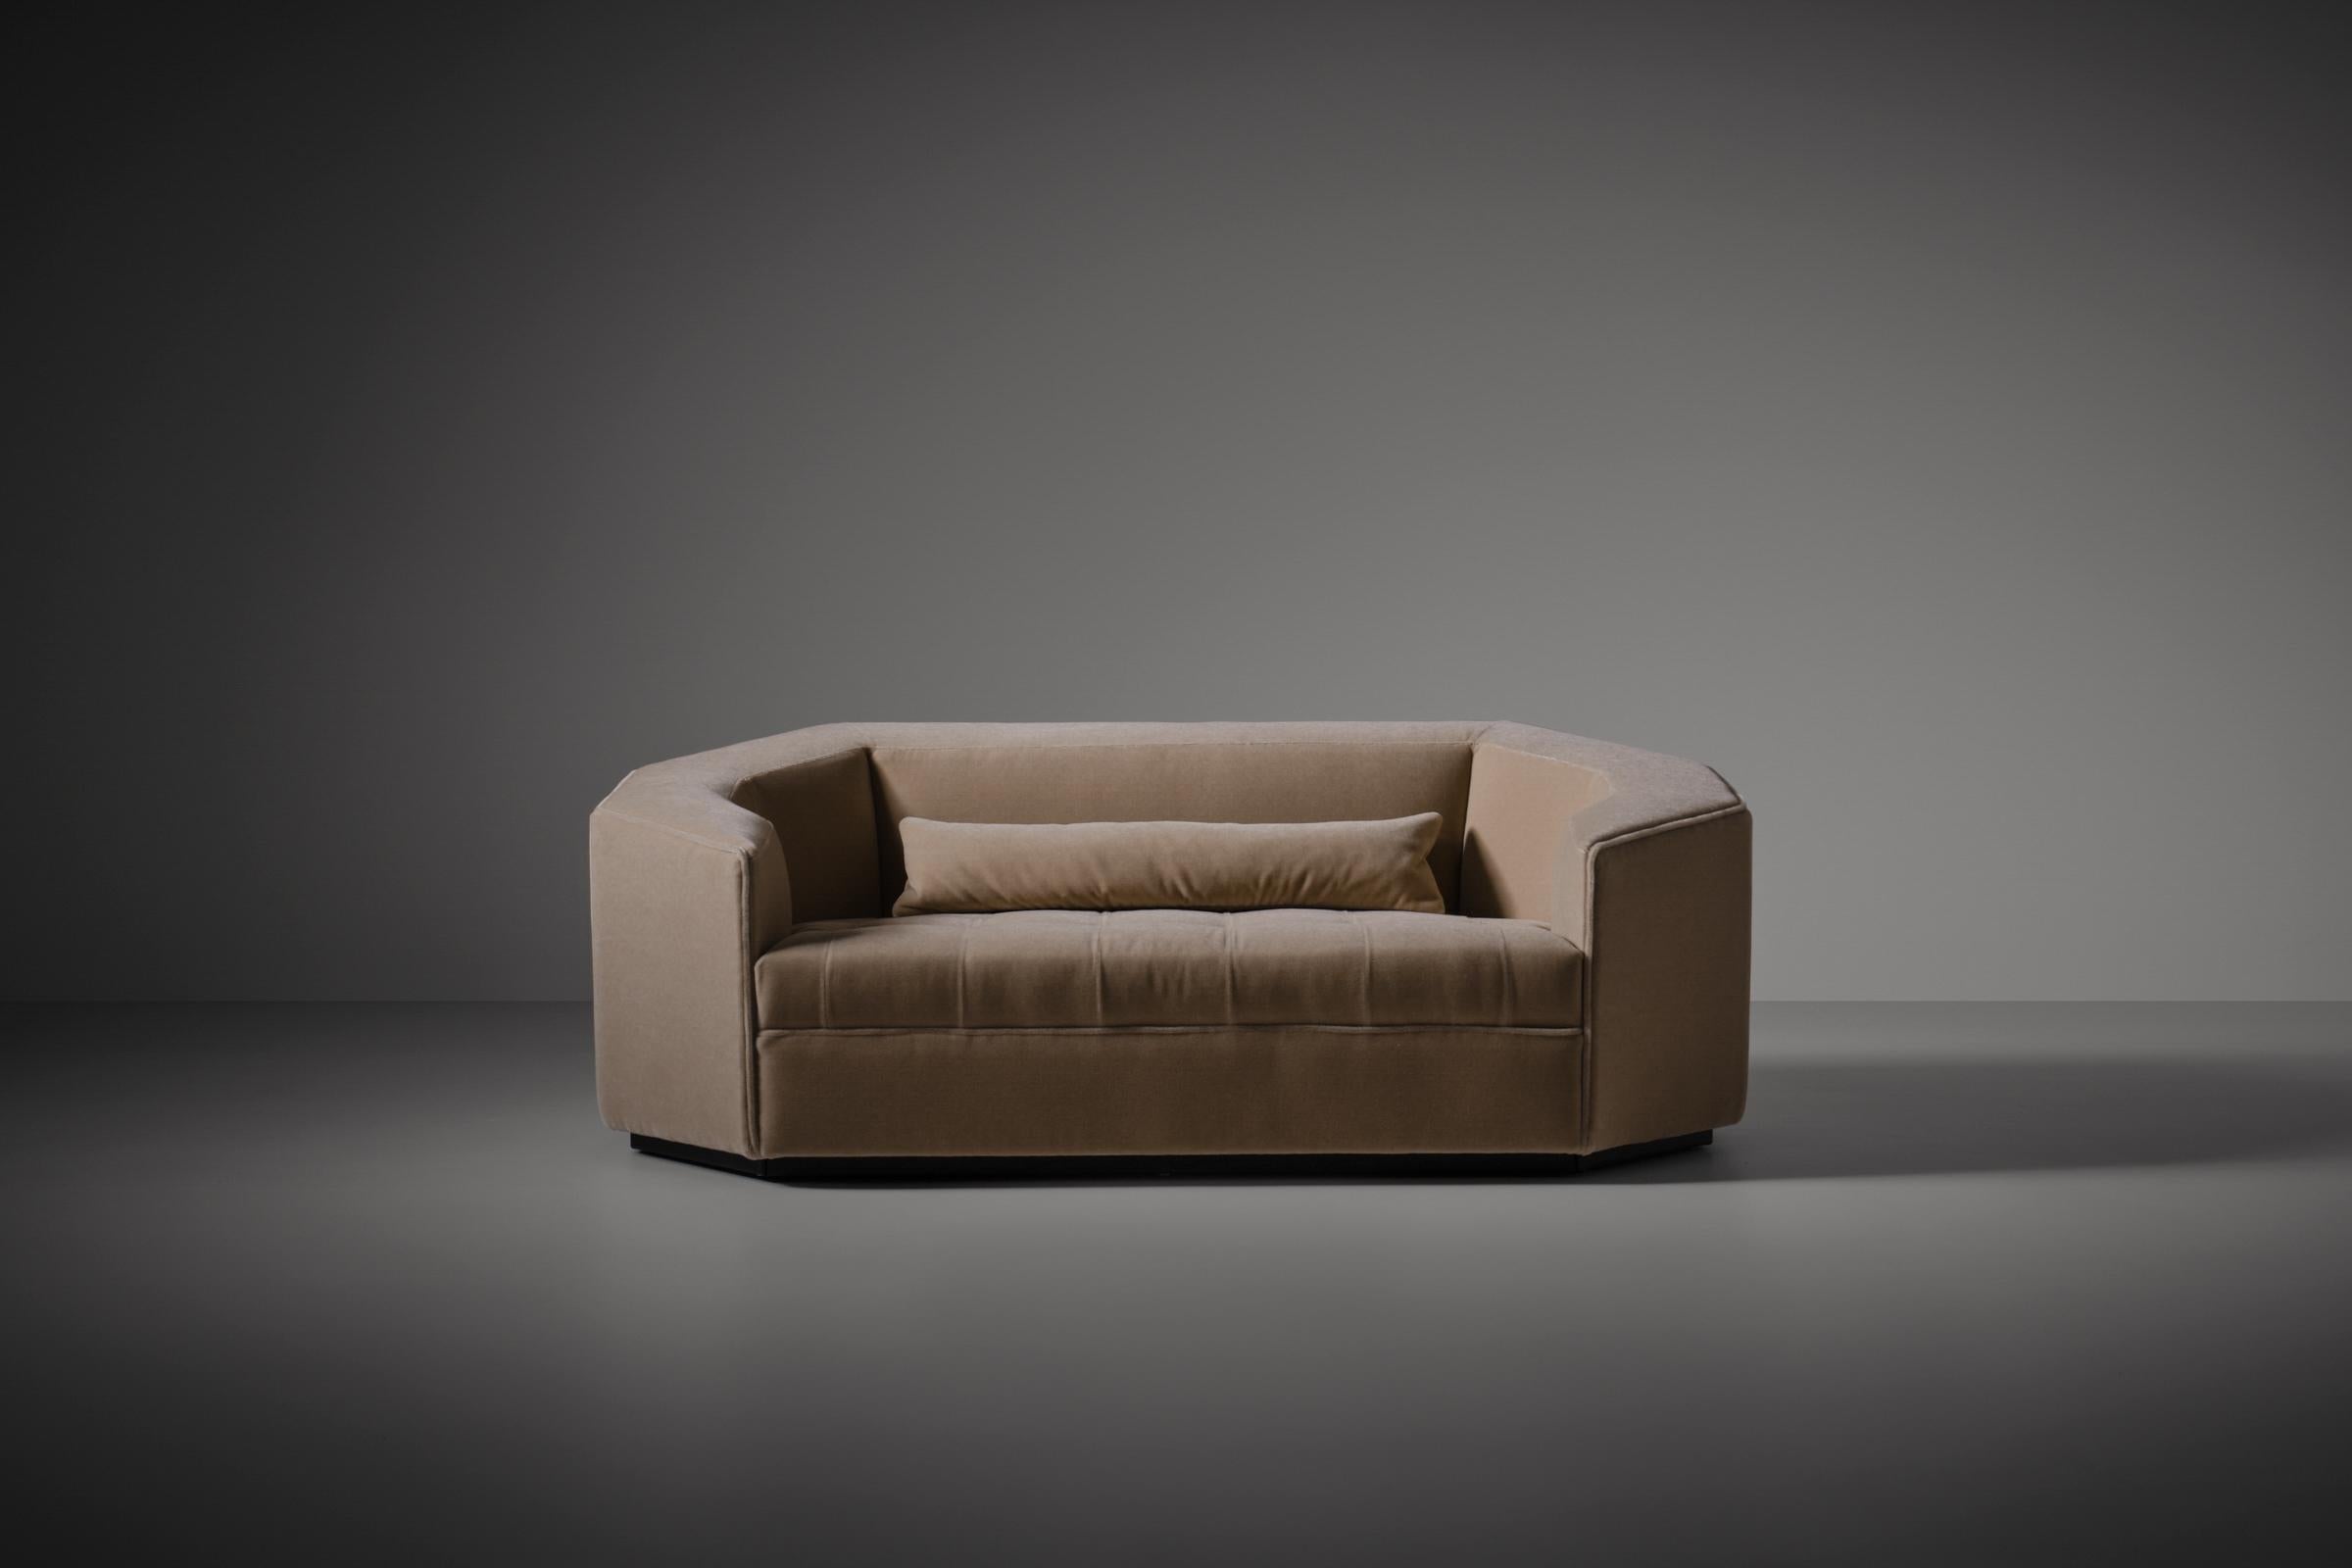 Rare sofa by Gérard Gallet (1934-1999) for Mobilier International, France circa 1980. Fantastic outspoken design by the famous French decorator Gérard Gallet who is known for his outspoken interiors for the famous Parisian elite. Gallet graduated